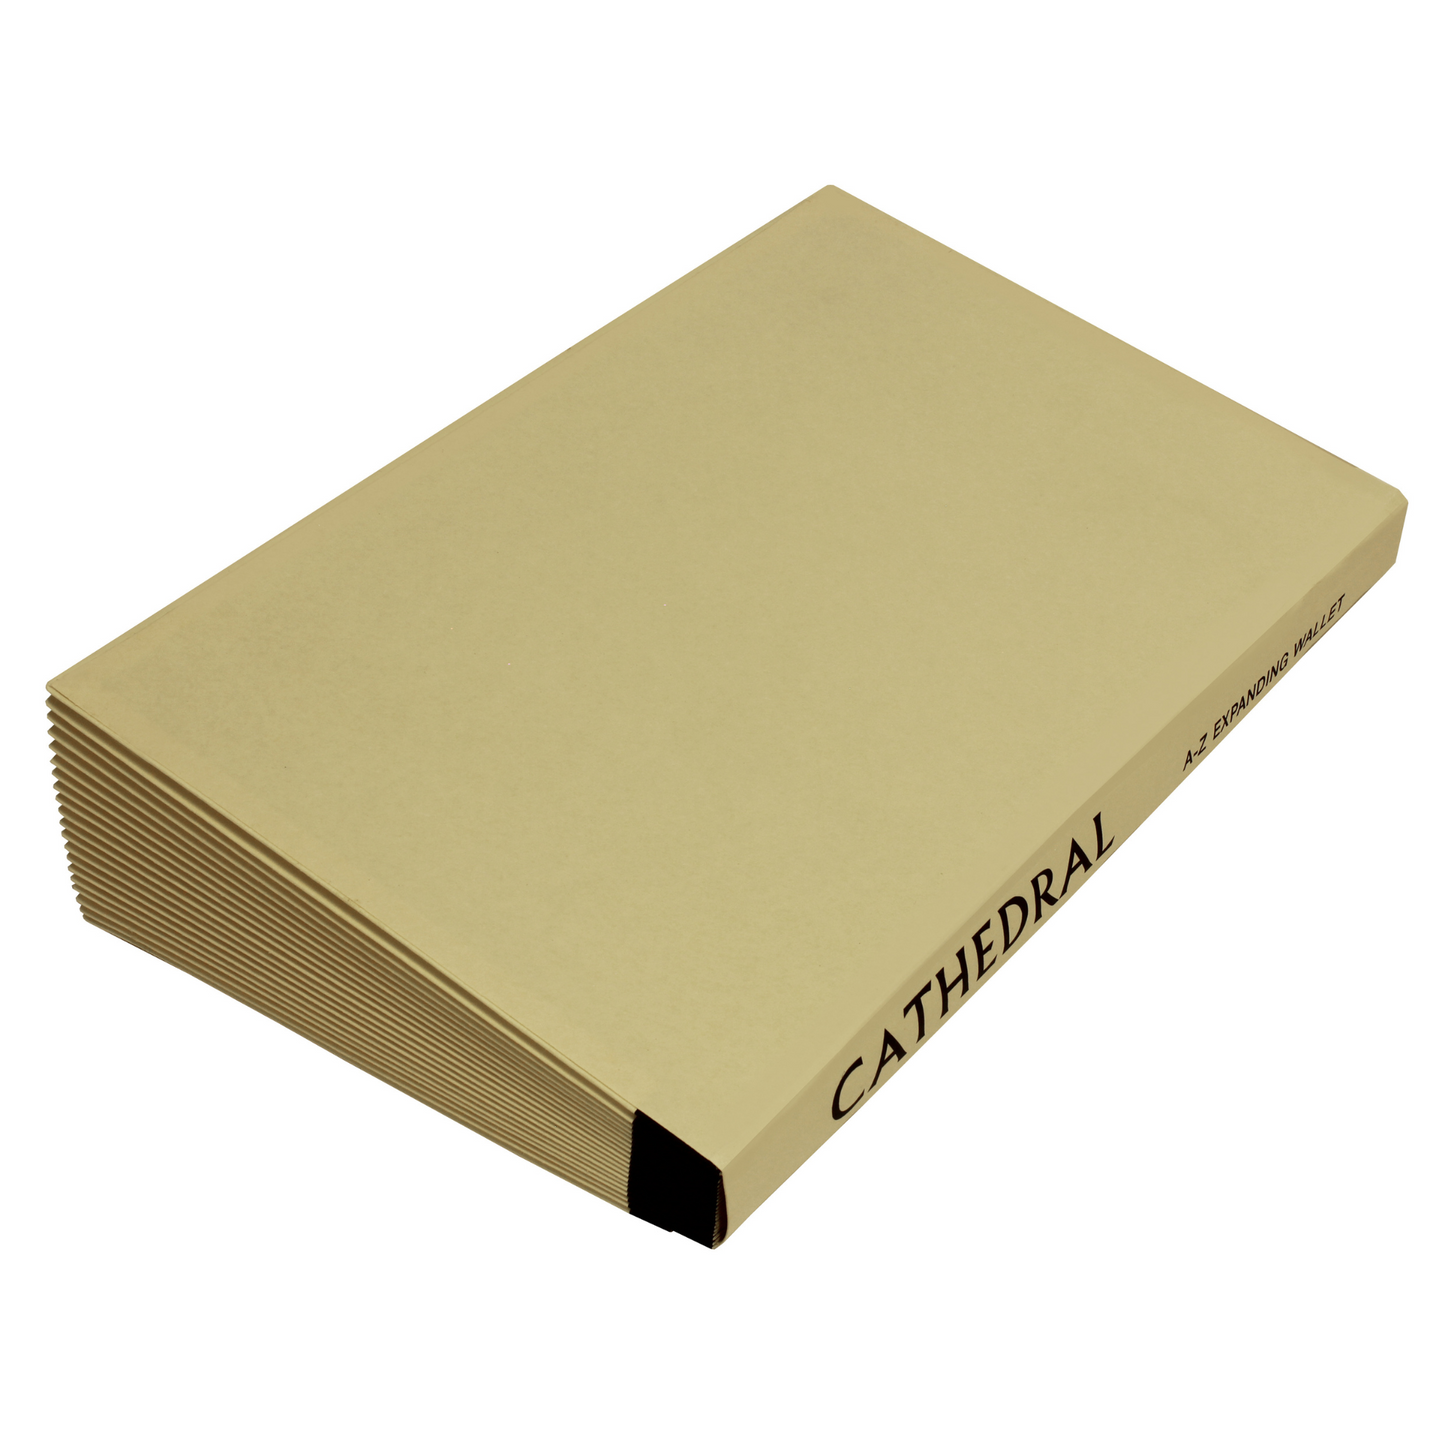 A beige manila, closed Cathedral Products A-Z expanding wallet laying flat, with the brand name 'CATHEDRAL' prominently displayed along the spine. The wallet's concertina side is partially visible, indicating its capacity to expand and hold a number of documents. The design is simple, with a focus on functionality and organization.